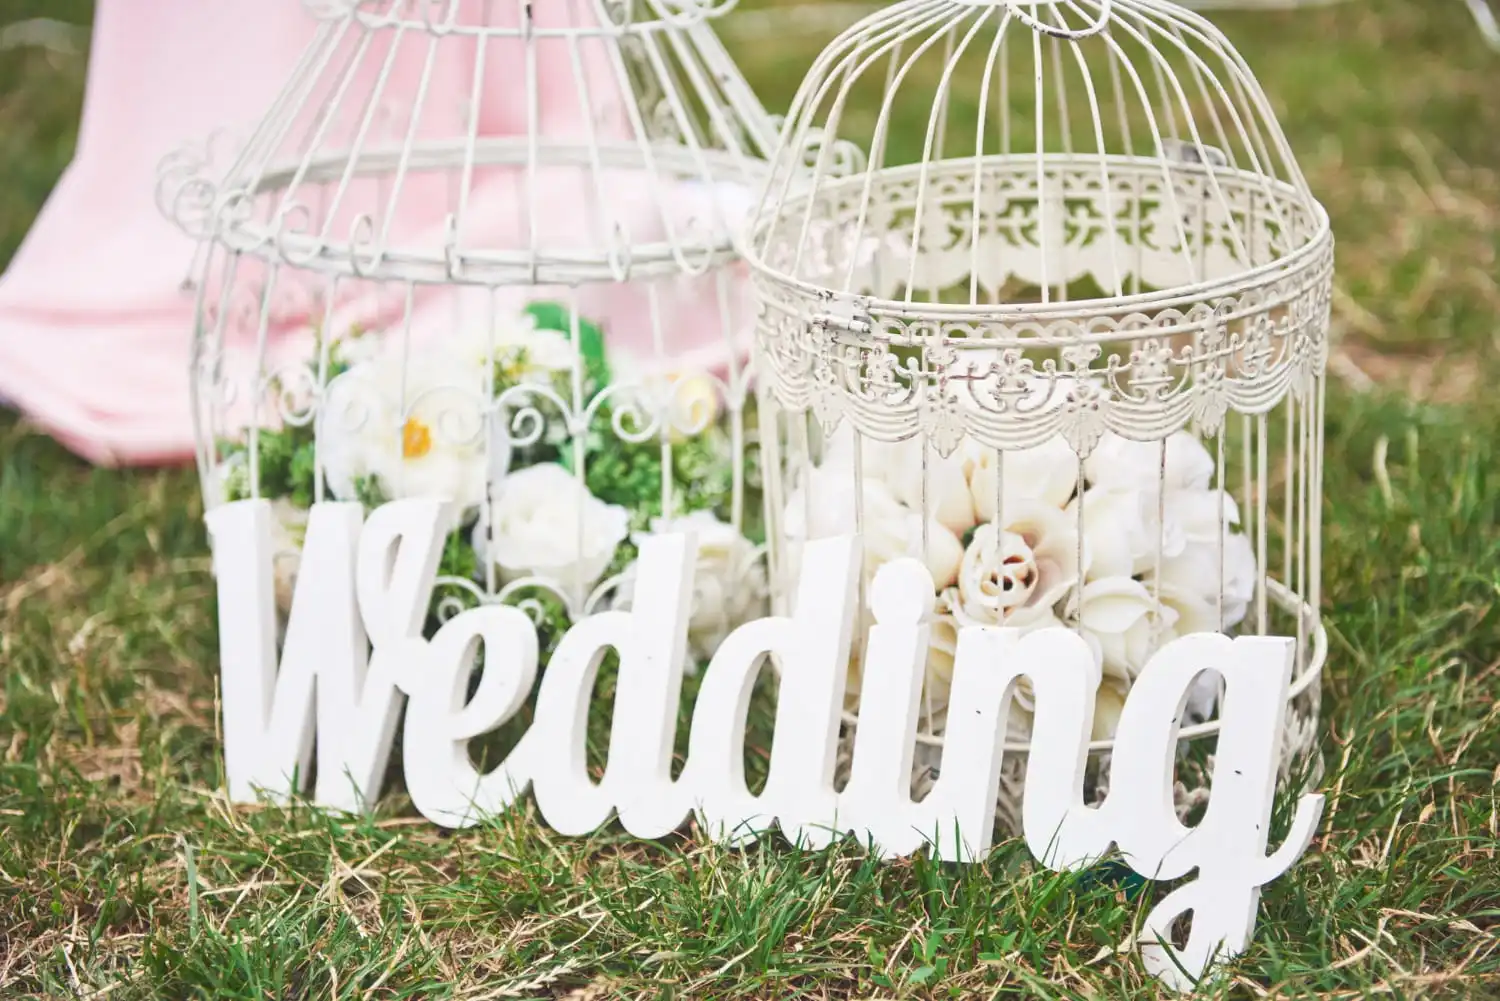 Elevate your special day with these 10 unique wedding ideas! Make your wedding unforgettable with creativity and charm. 💍 #WeddingInspiration #UniqueIdeas